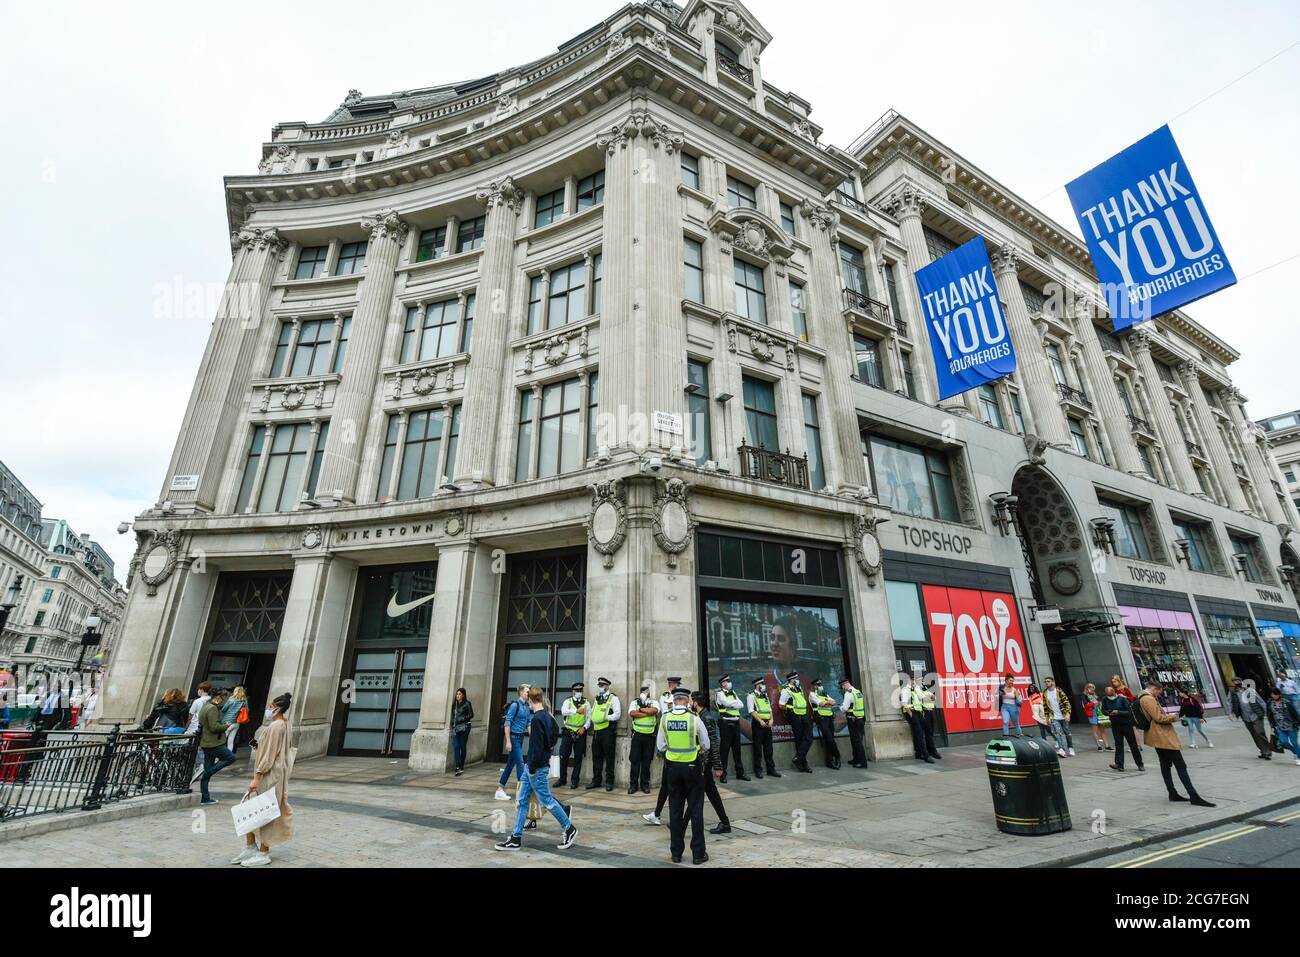 London, UK. 9 September 2020. Police outside Nike Town and Topshop as  activists from Extinction Rebellion (XR) stage a 